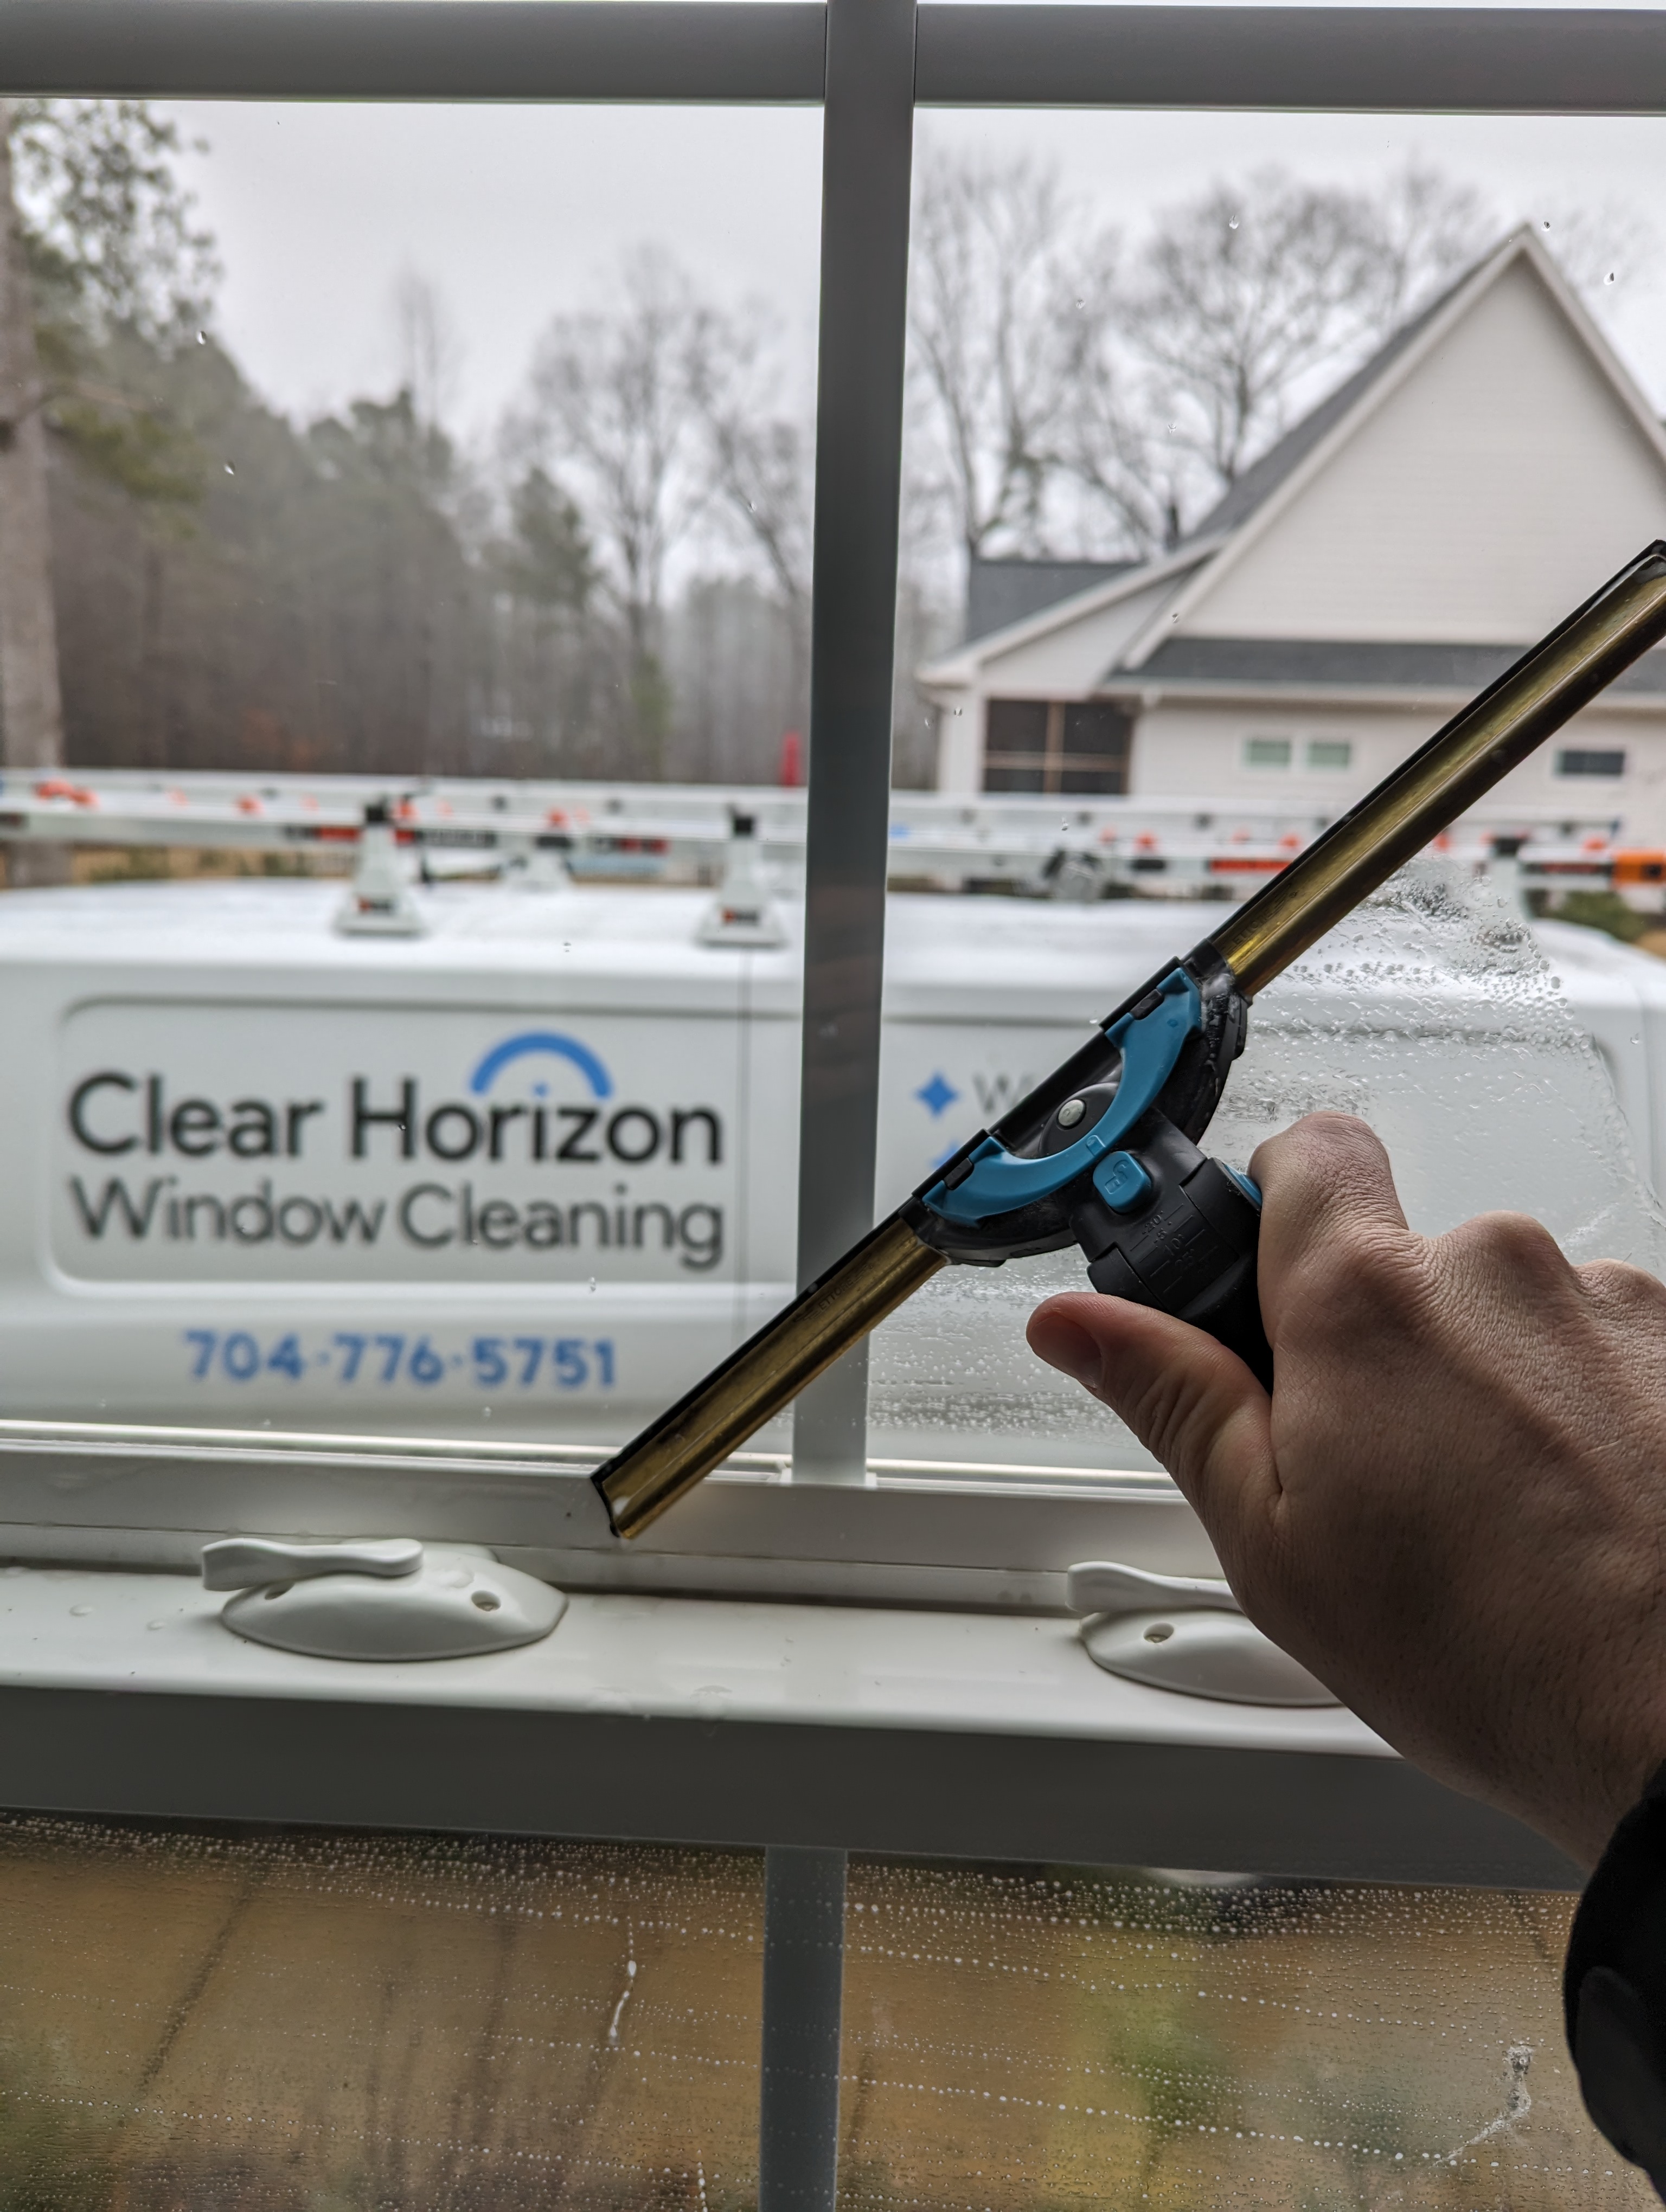 Remarkable Window Cleaning Service in Matthews, NC